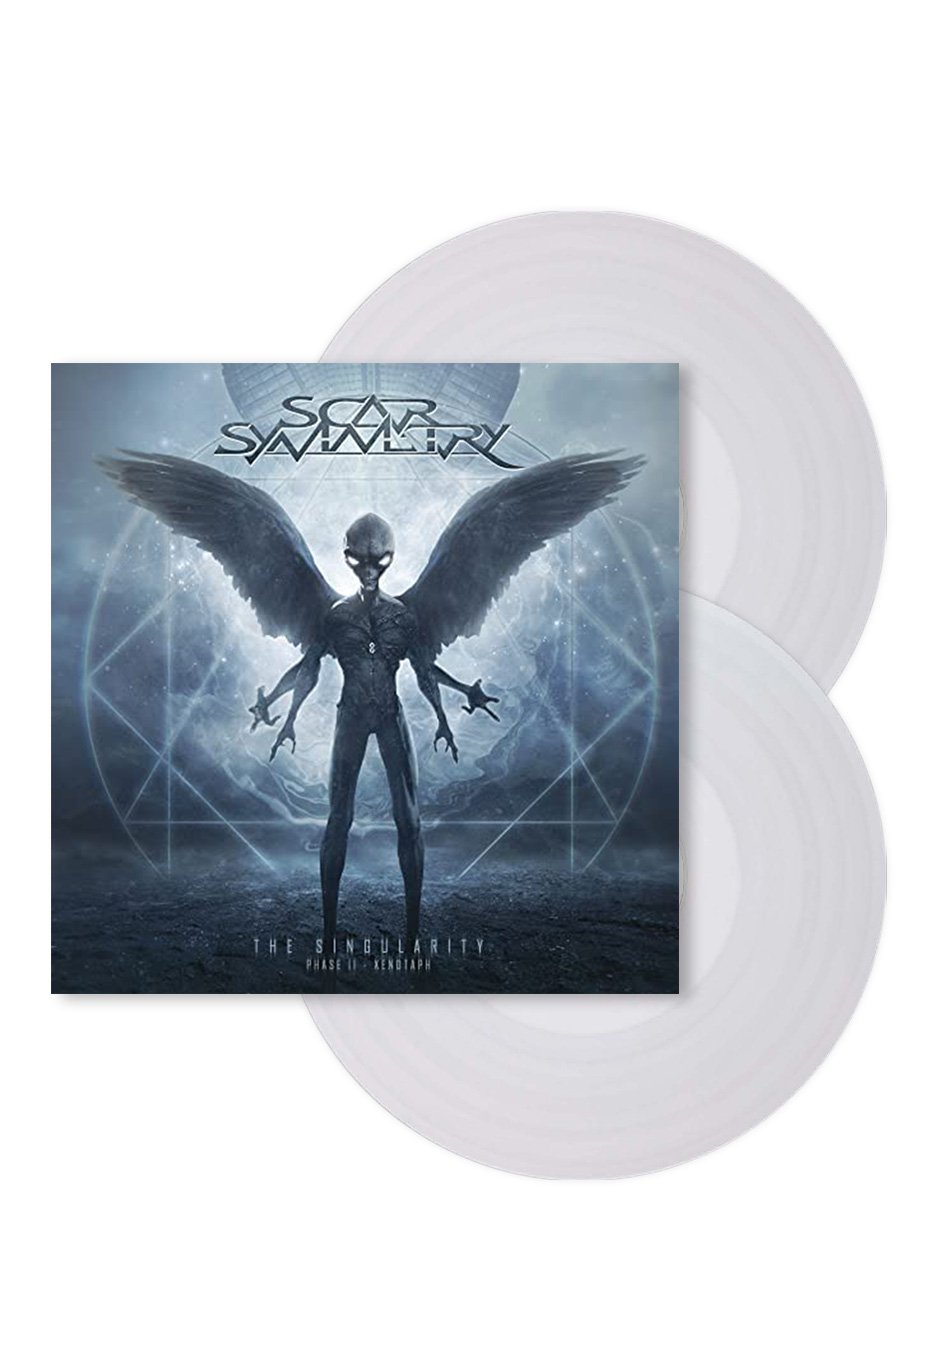 Scar Symmetry - The Singularity Phase II-Xenotaph Clear - Colored 2 Vinyl